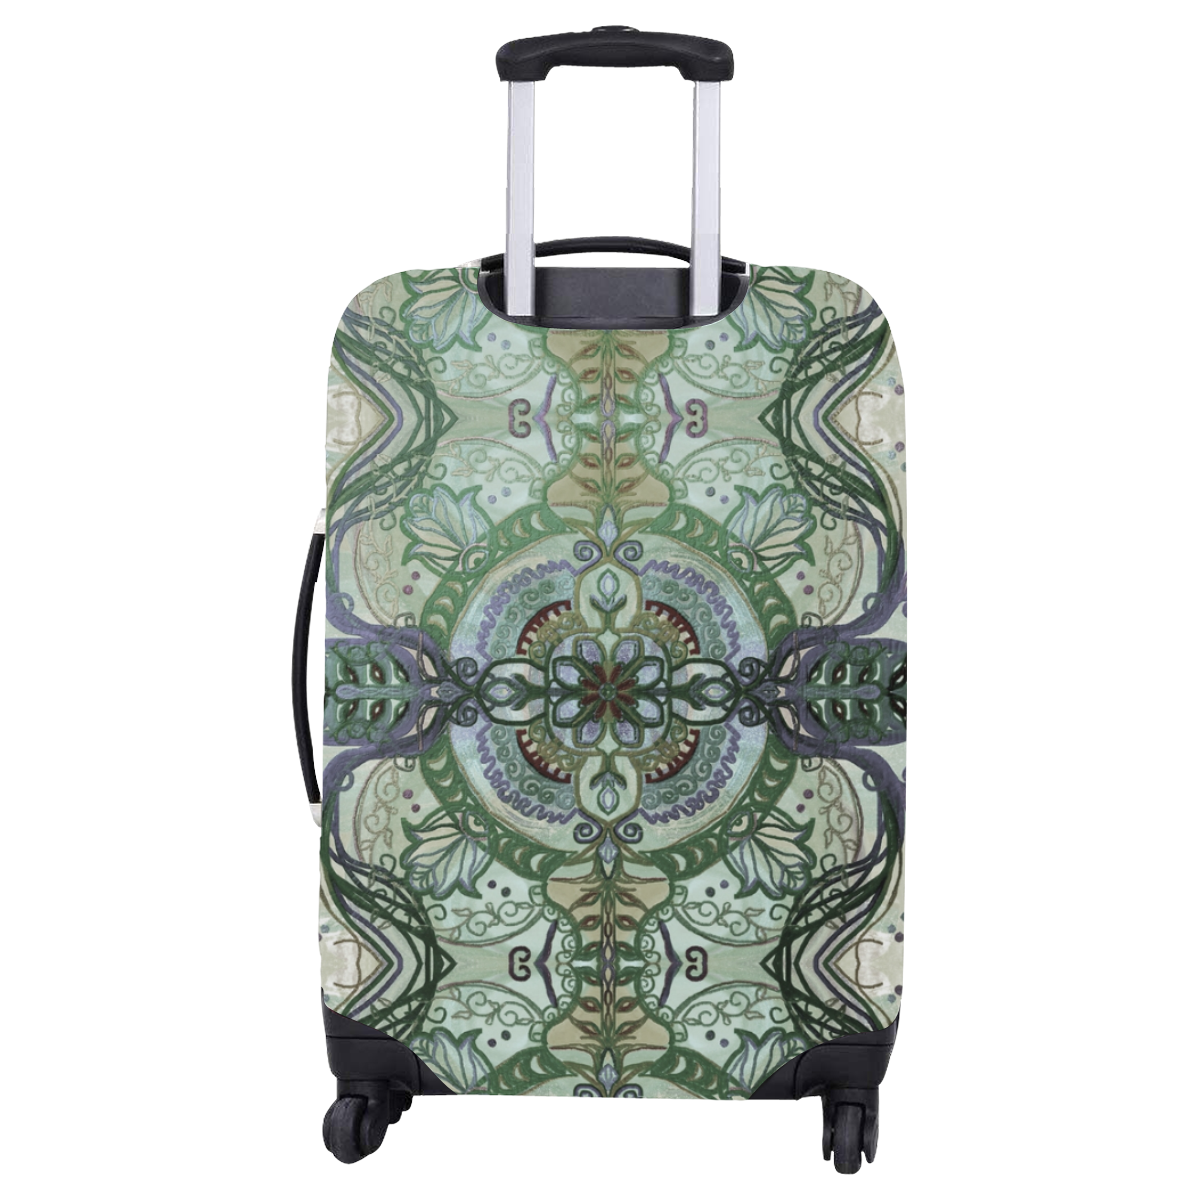 floralie 6 Luggage Cover/Large 26"-28"